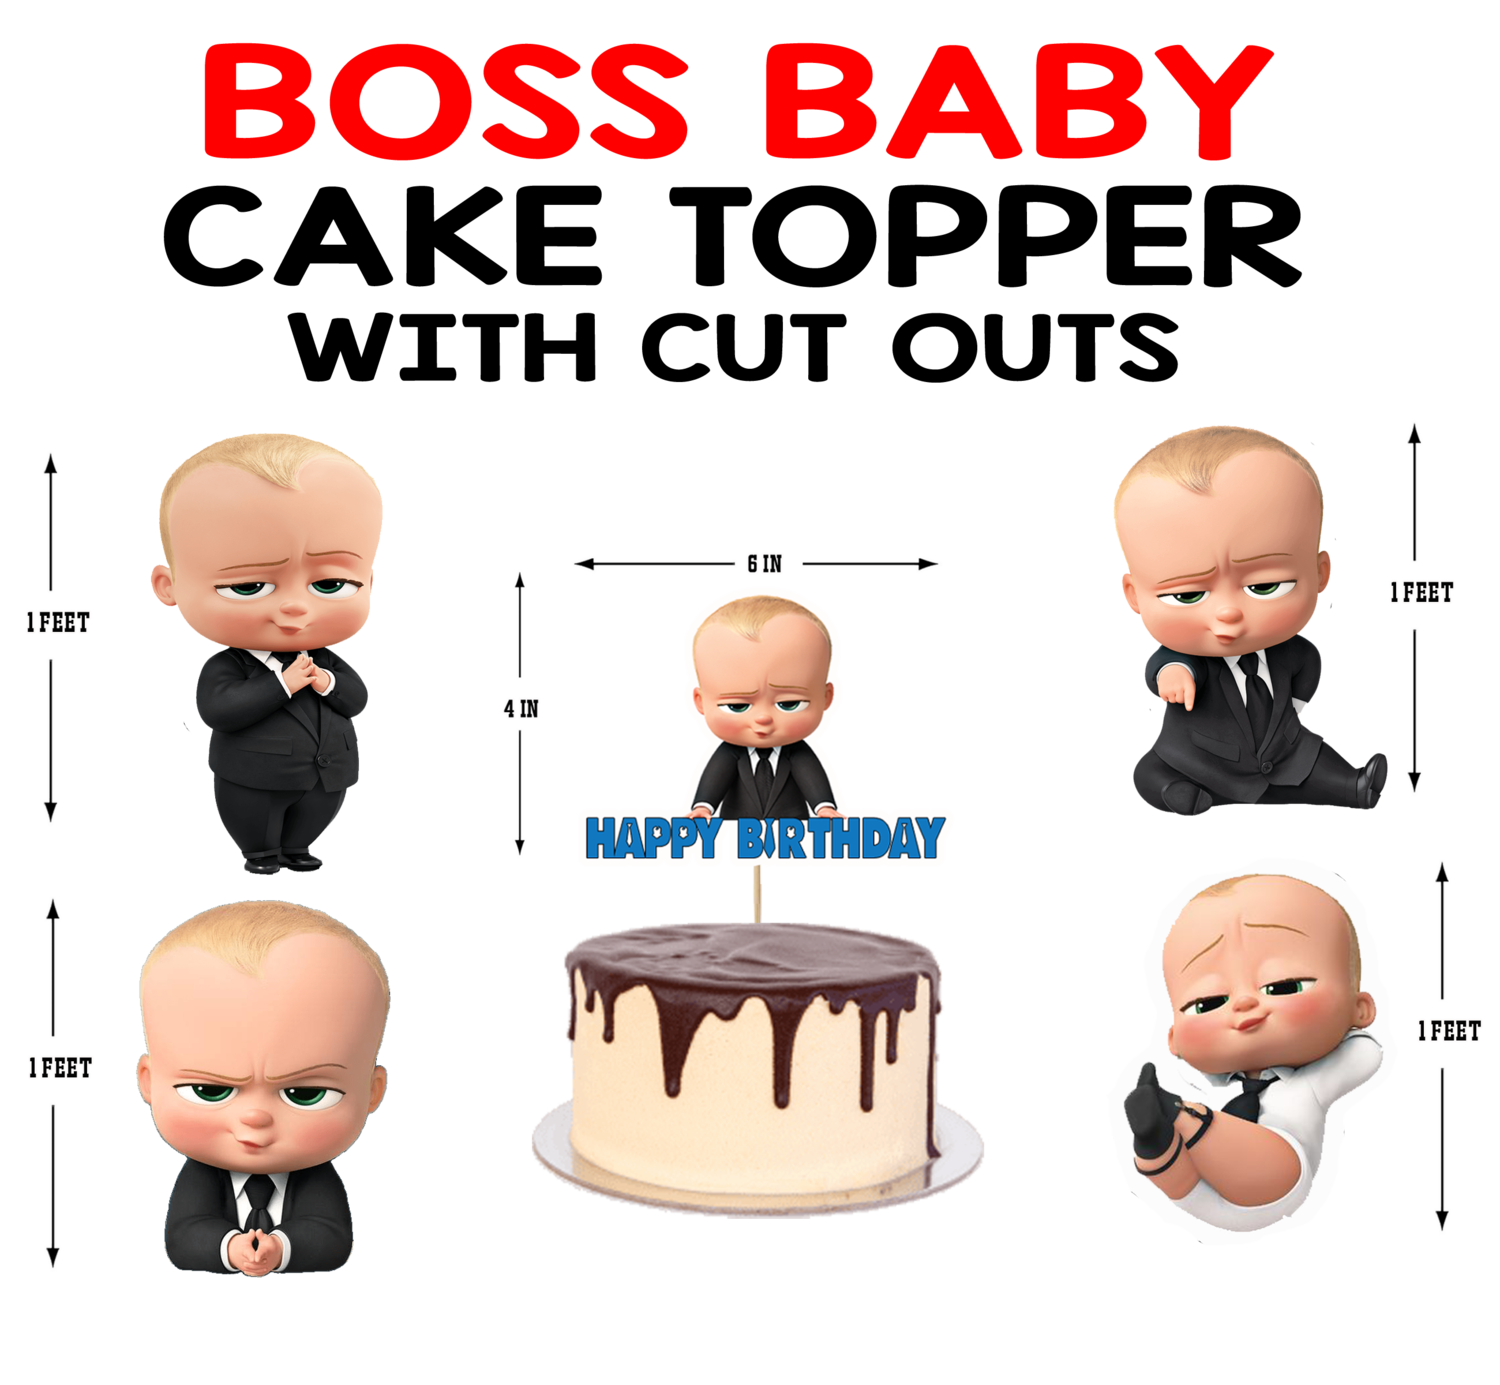 Photo Booth Party Props Boss Baby | lupon.gov.ph